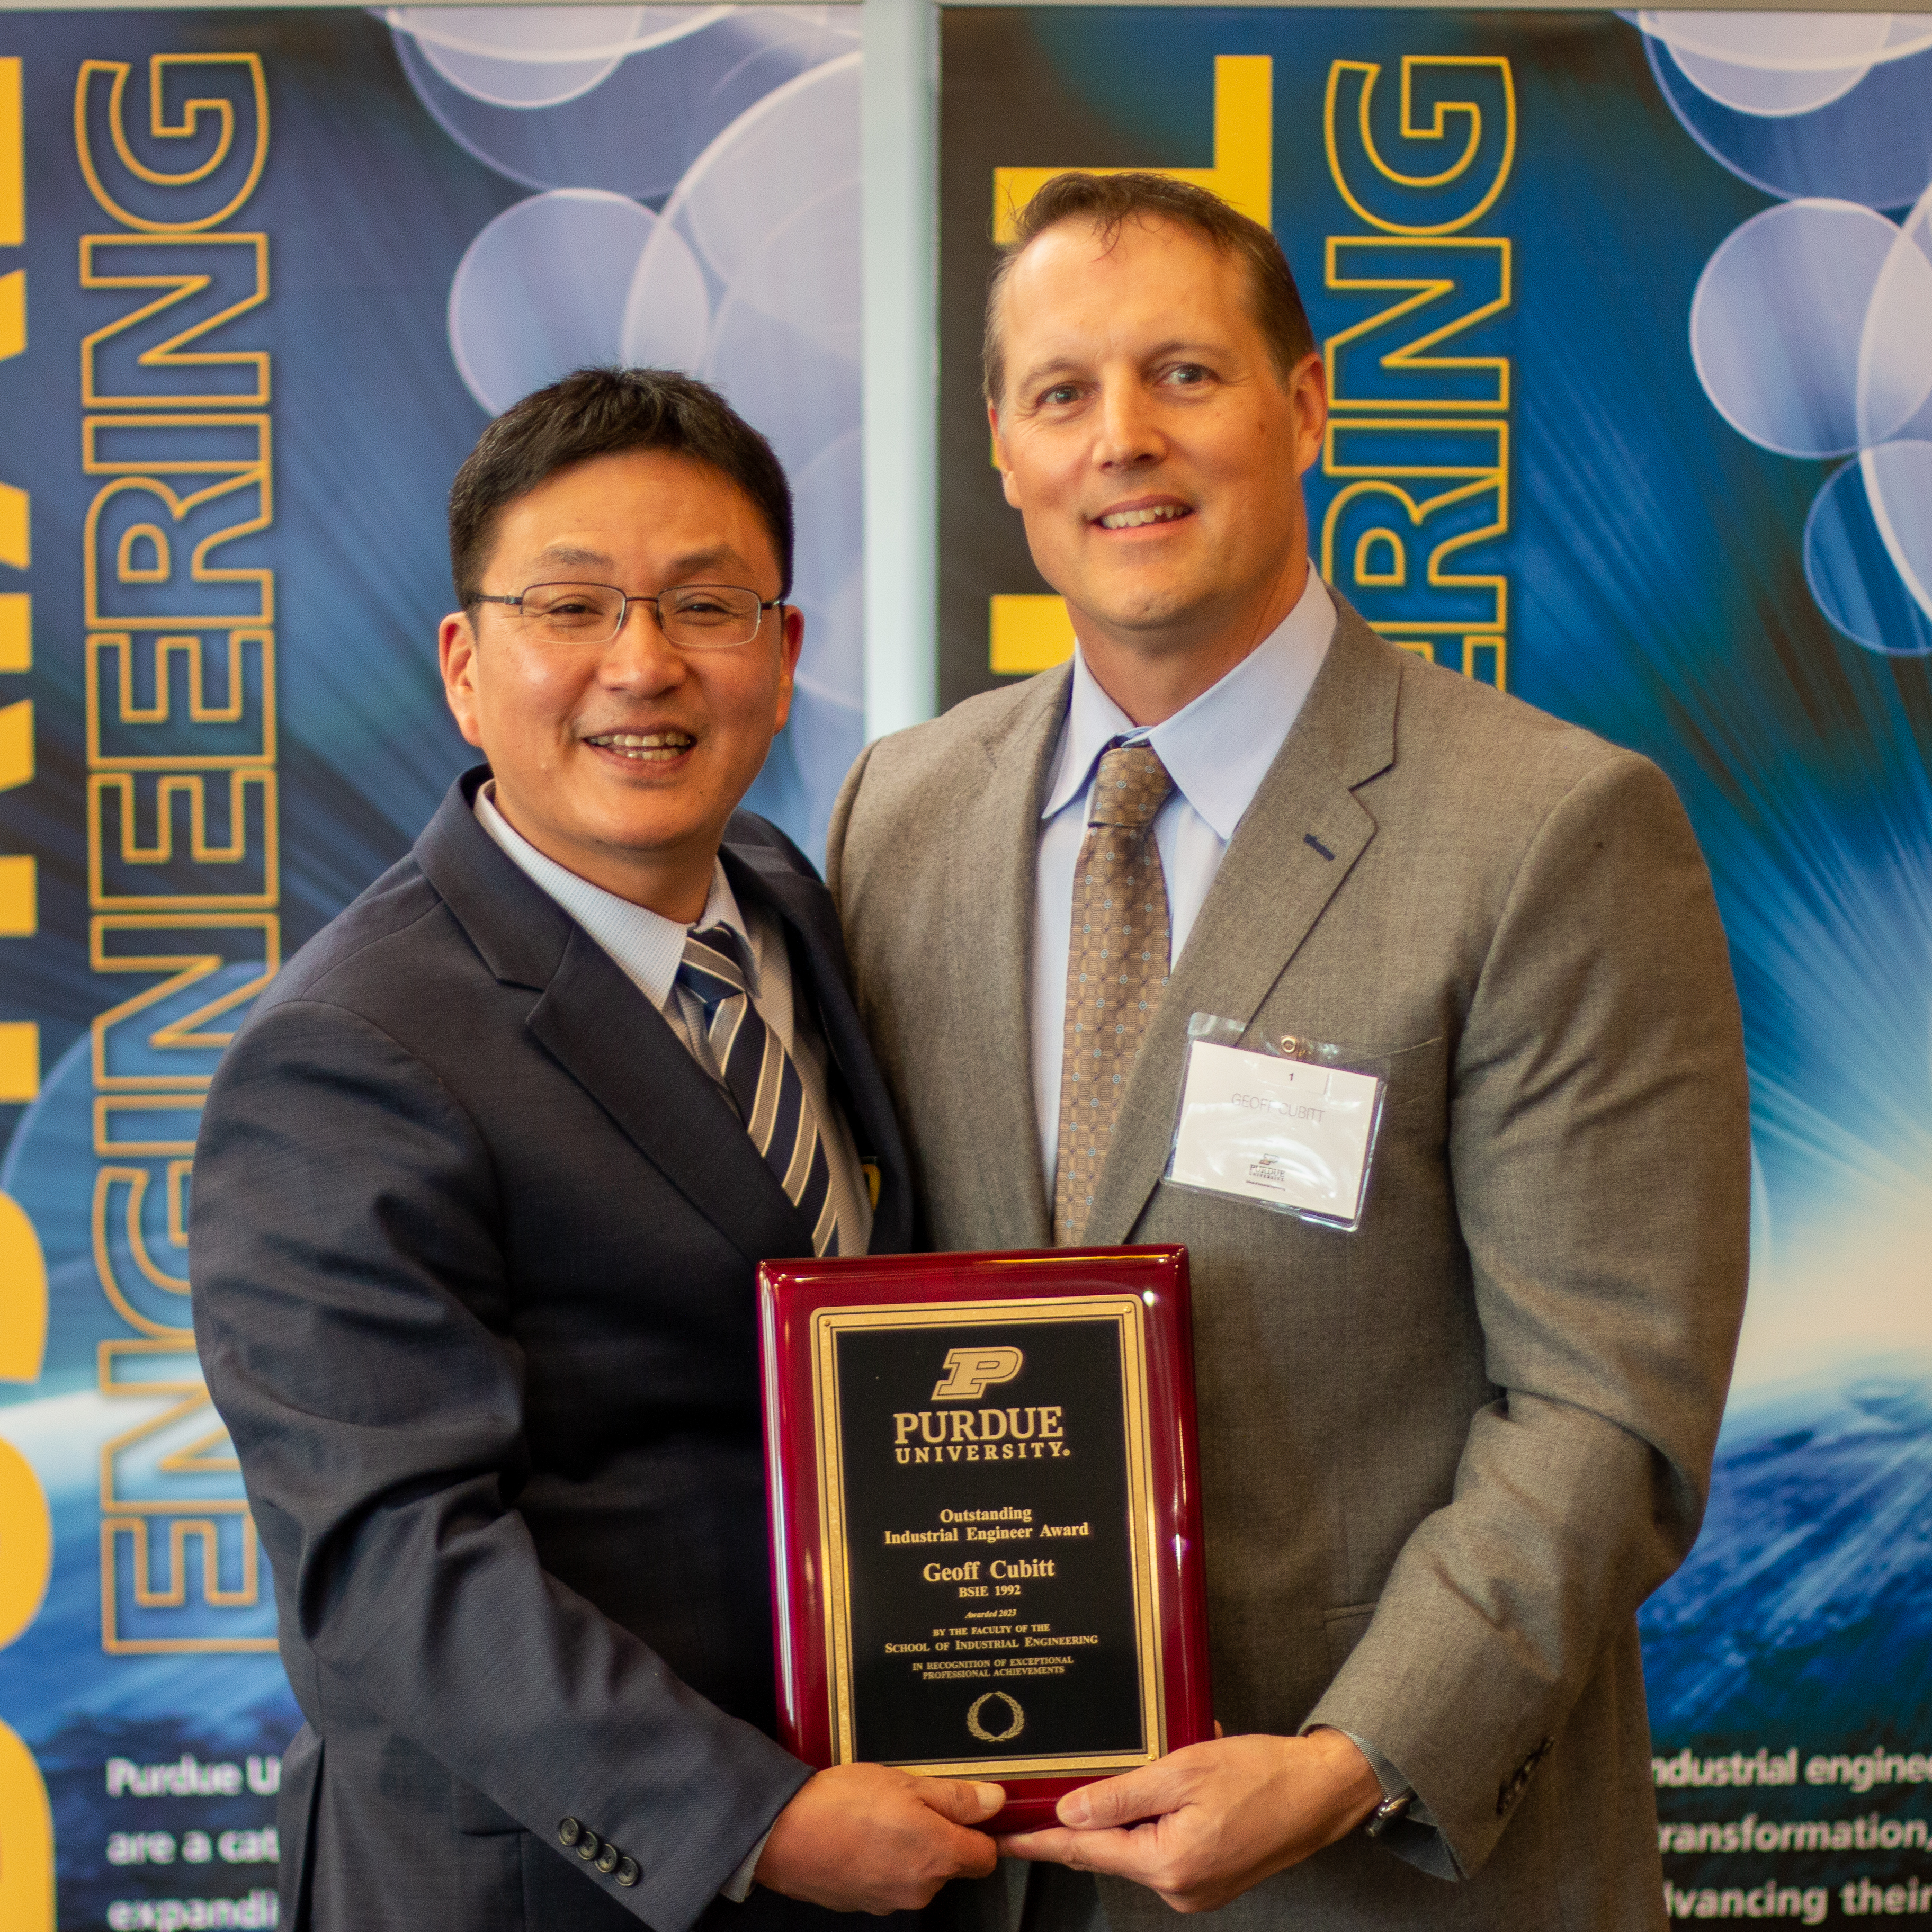 Geoff Cubit posing with Dr. Son after accepting award.